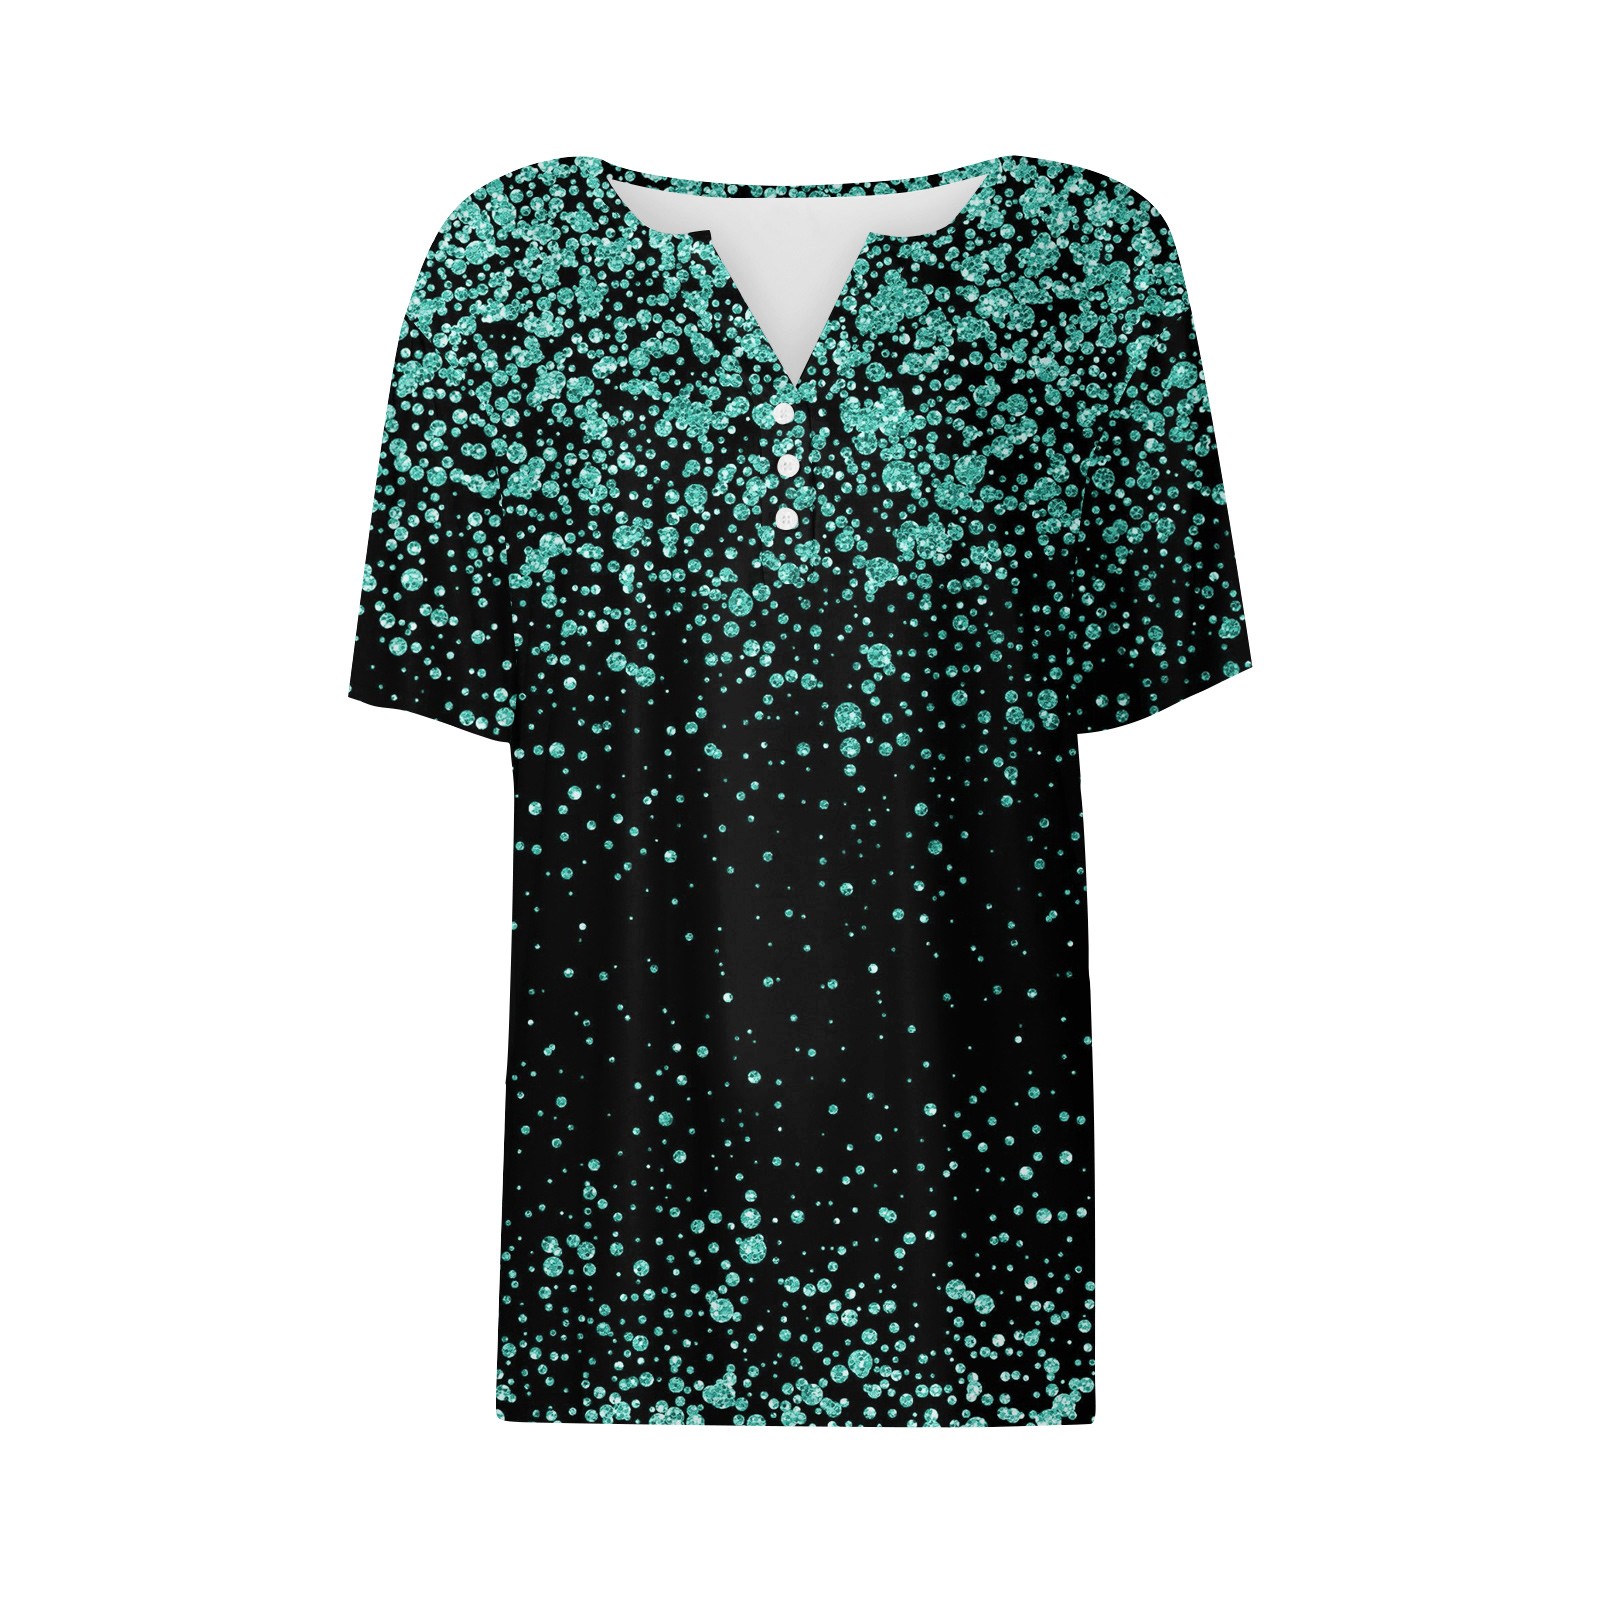 RPVATI Going Out Tops for Women Casual Henley Short Sleeve Sparkly ...